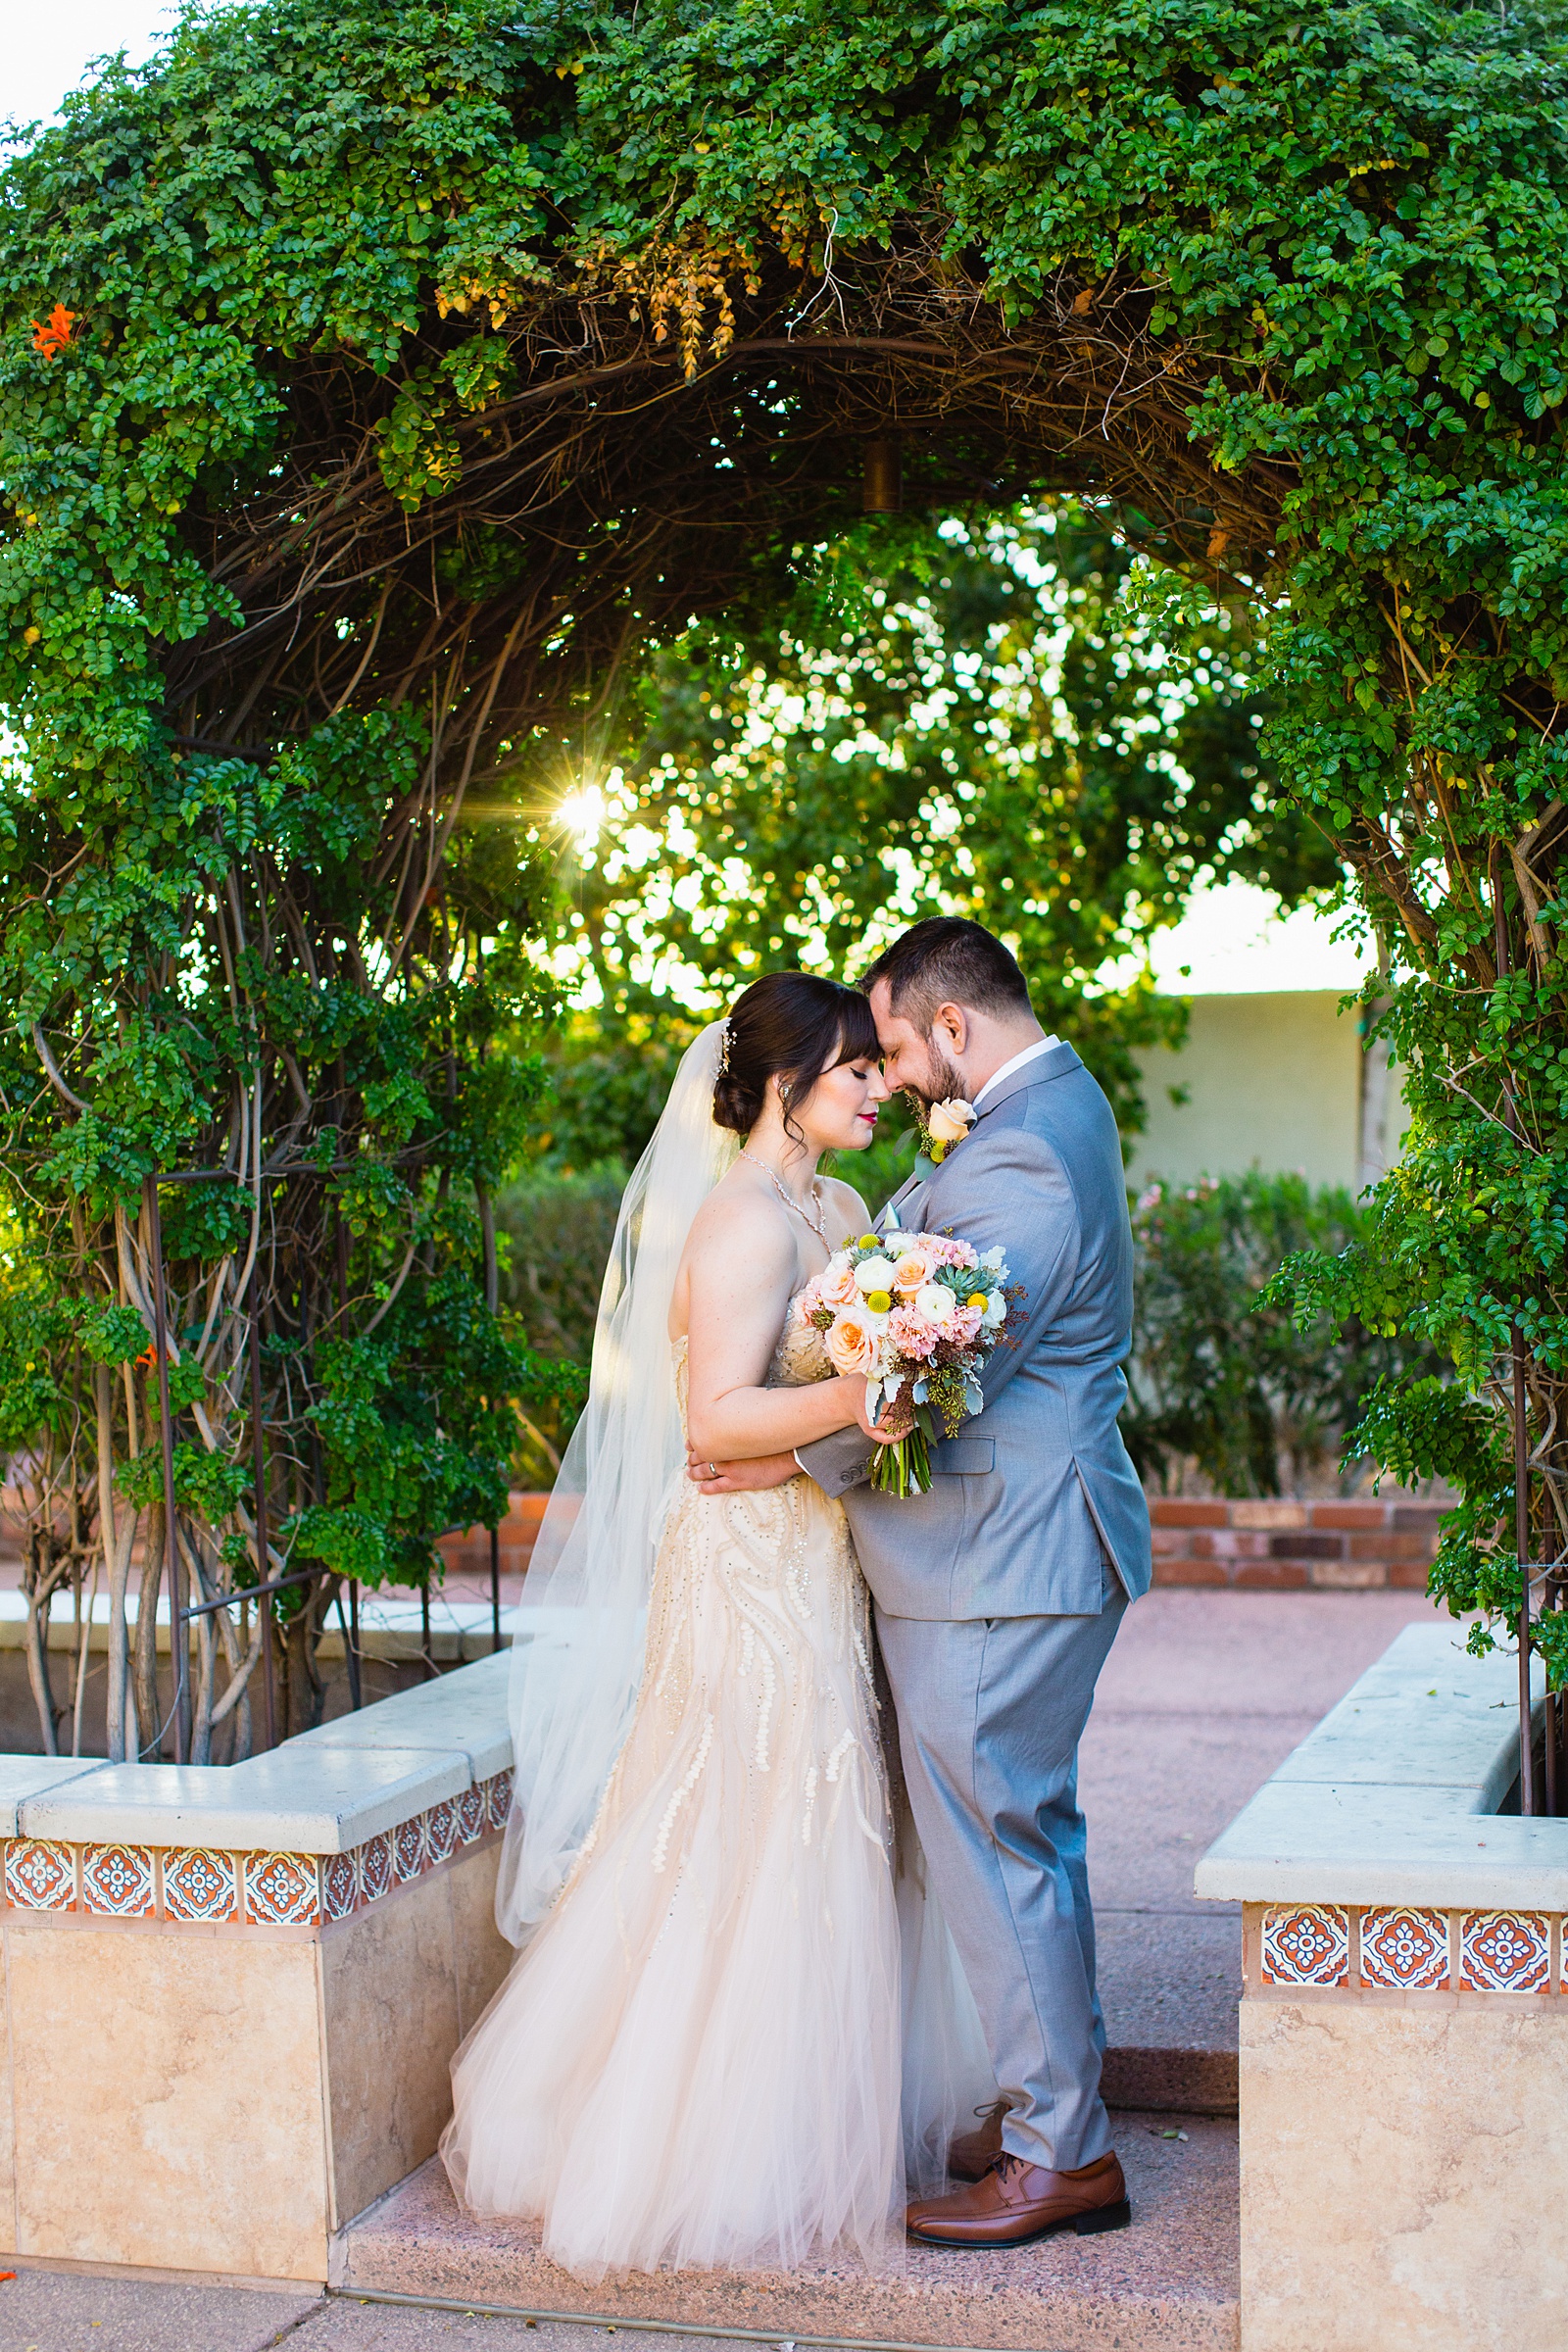 Bride and Groom share an intimate moment at their Bella Rose Estate wedding by Arizona wedding photographer PMA Photography.